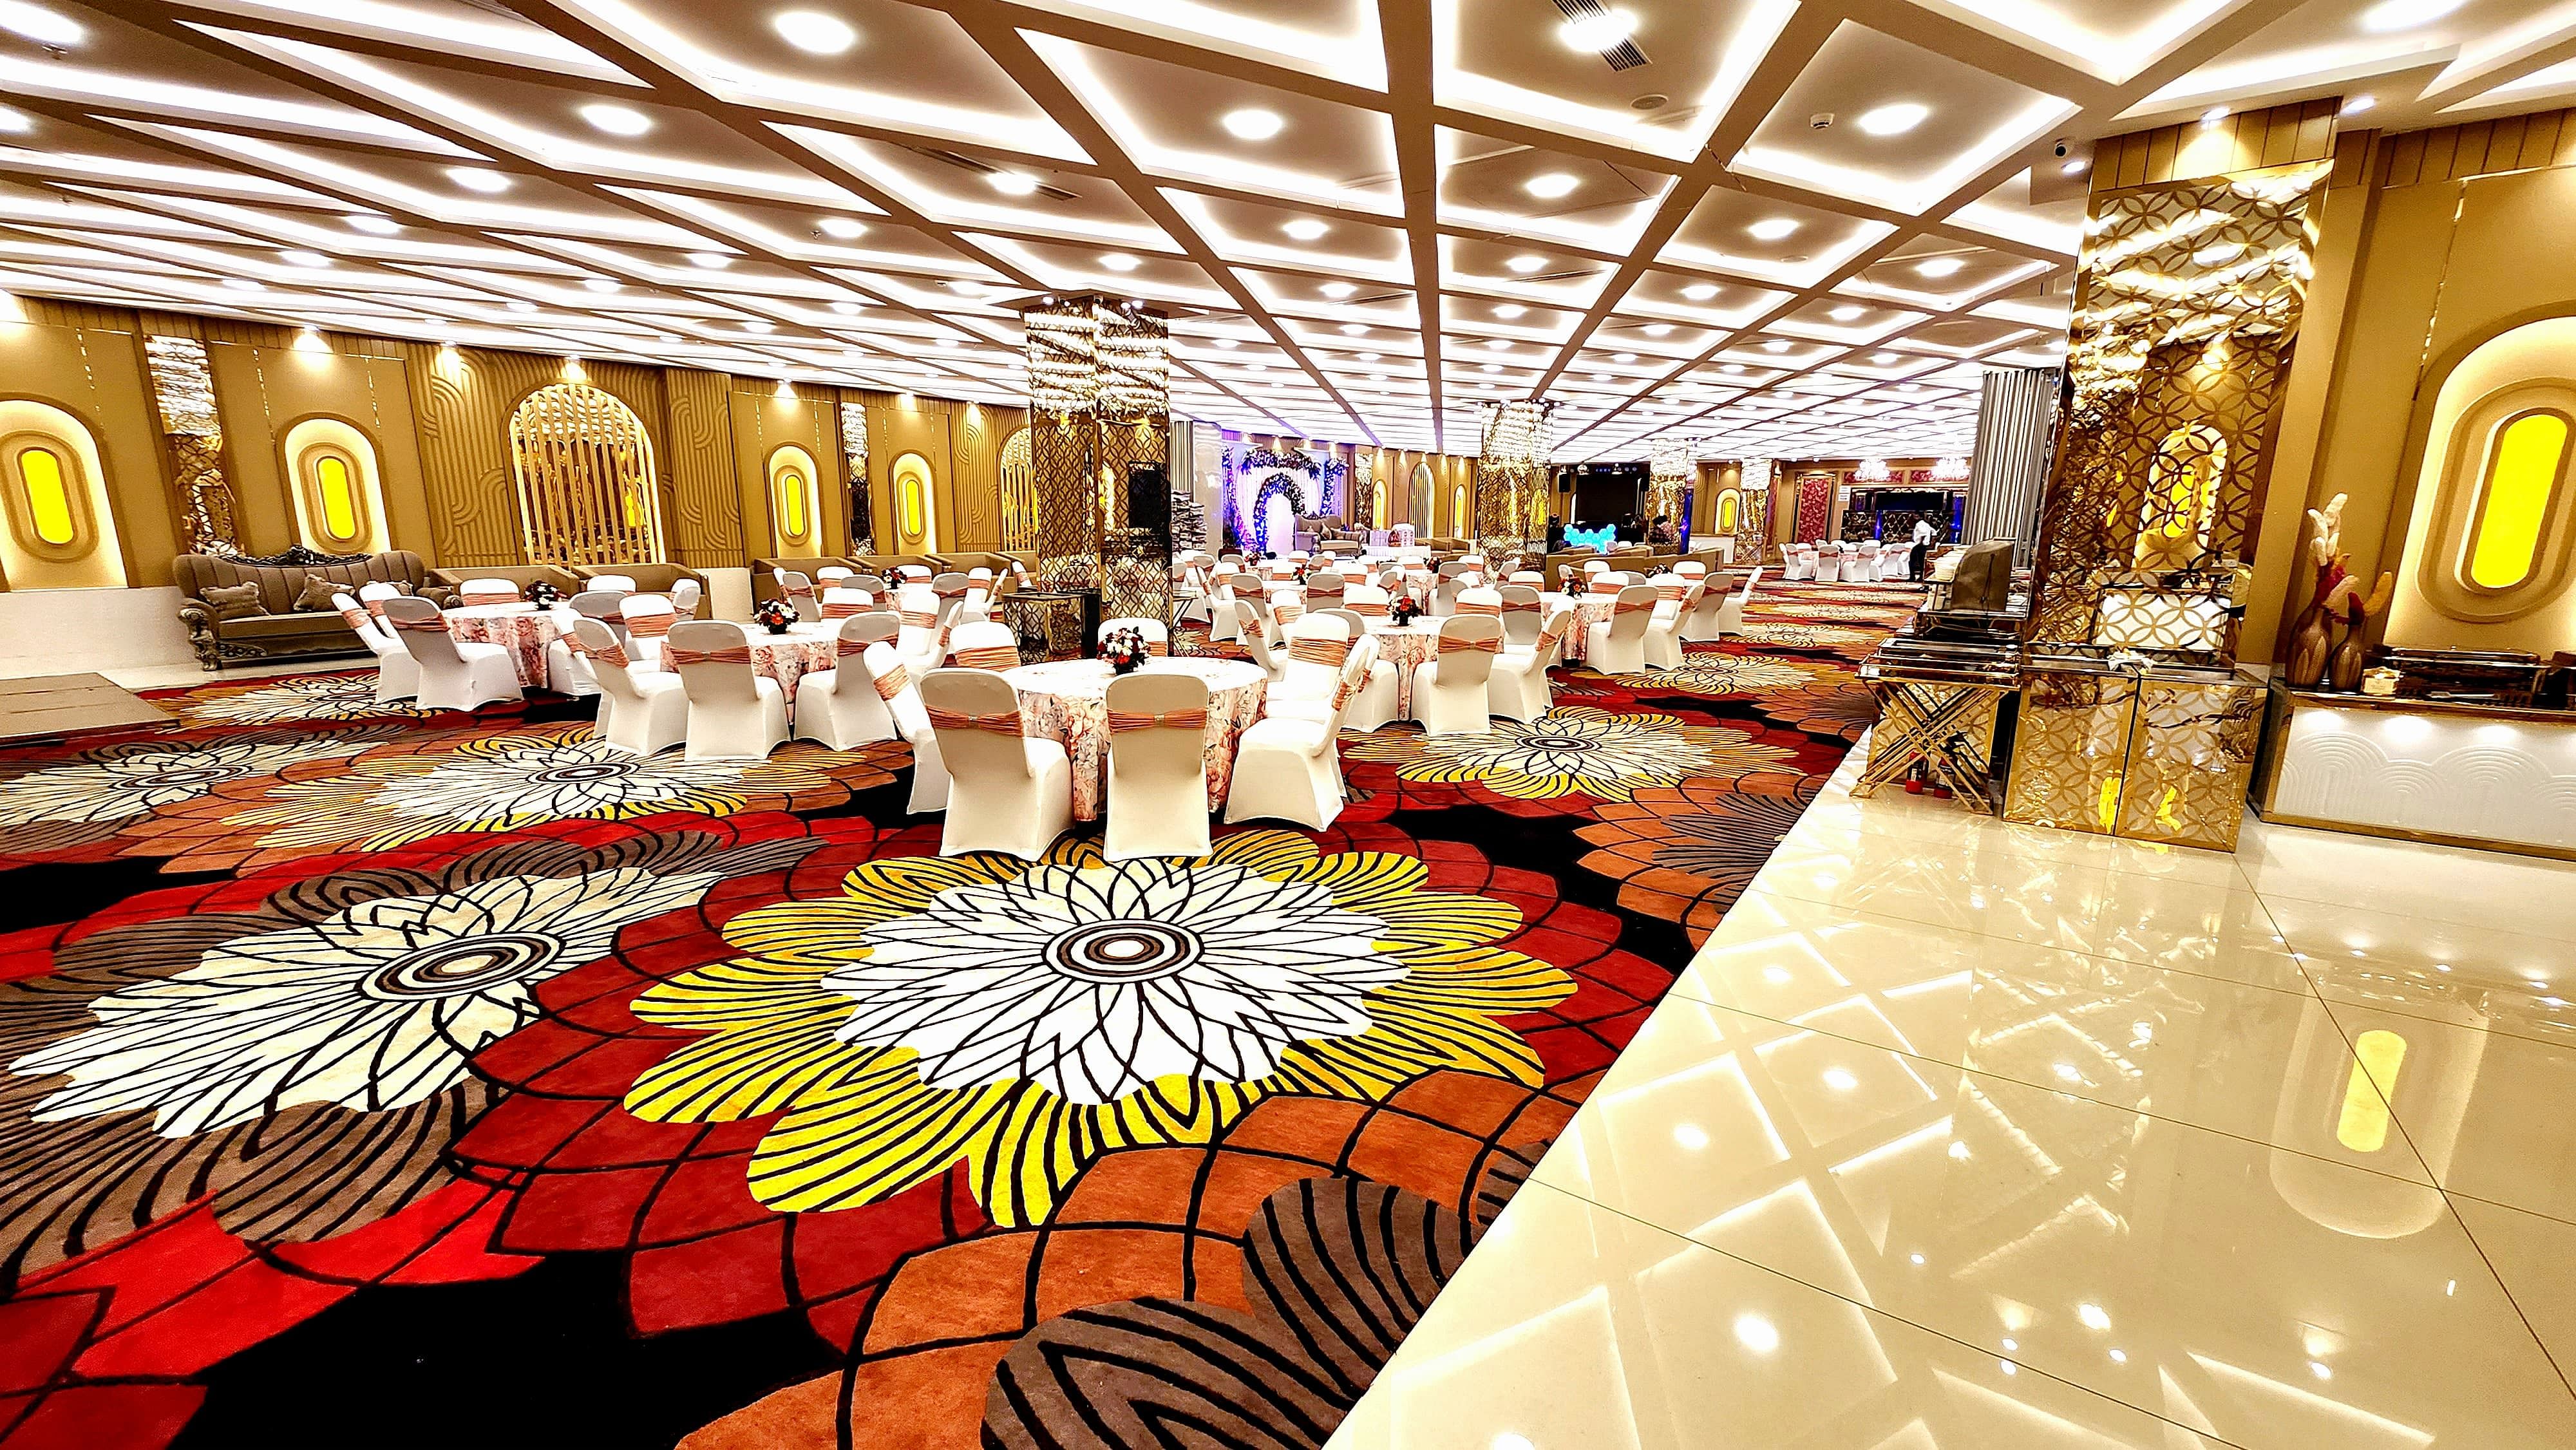 The Grand Taj Banquet Conventions in Sector 48, Gurgaon